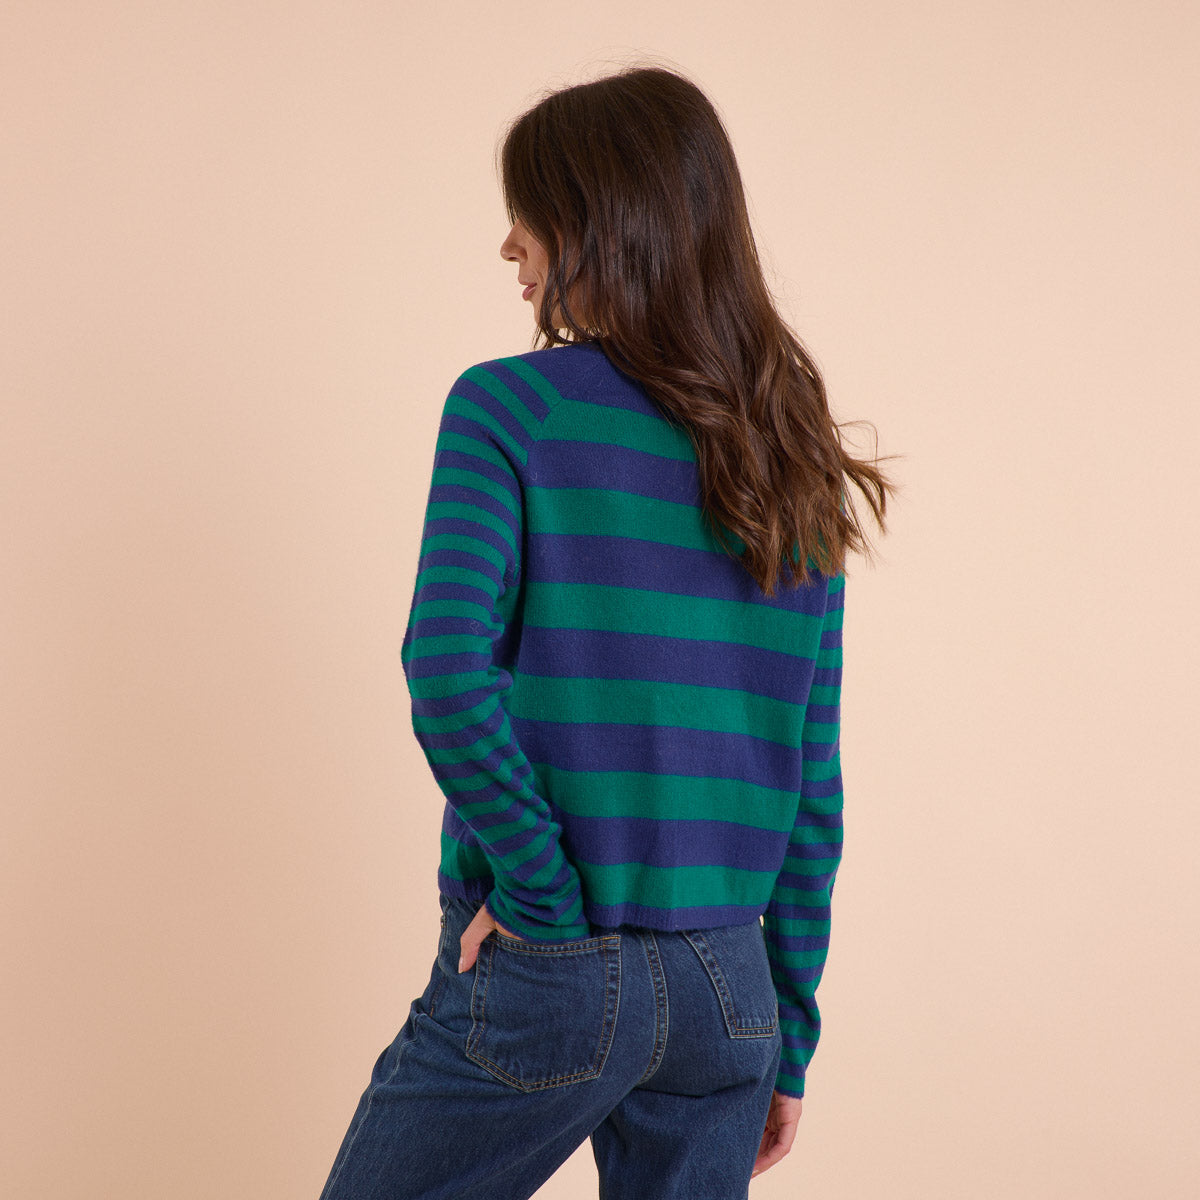 NYCOLE STRIPED SHIRT - GREEN